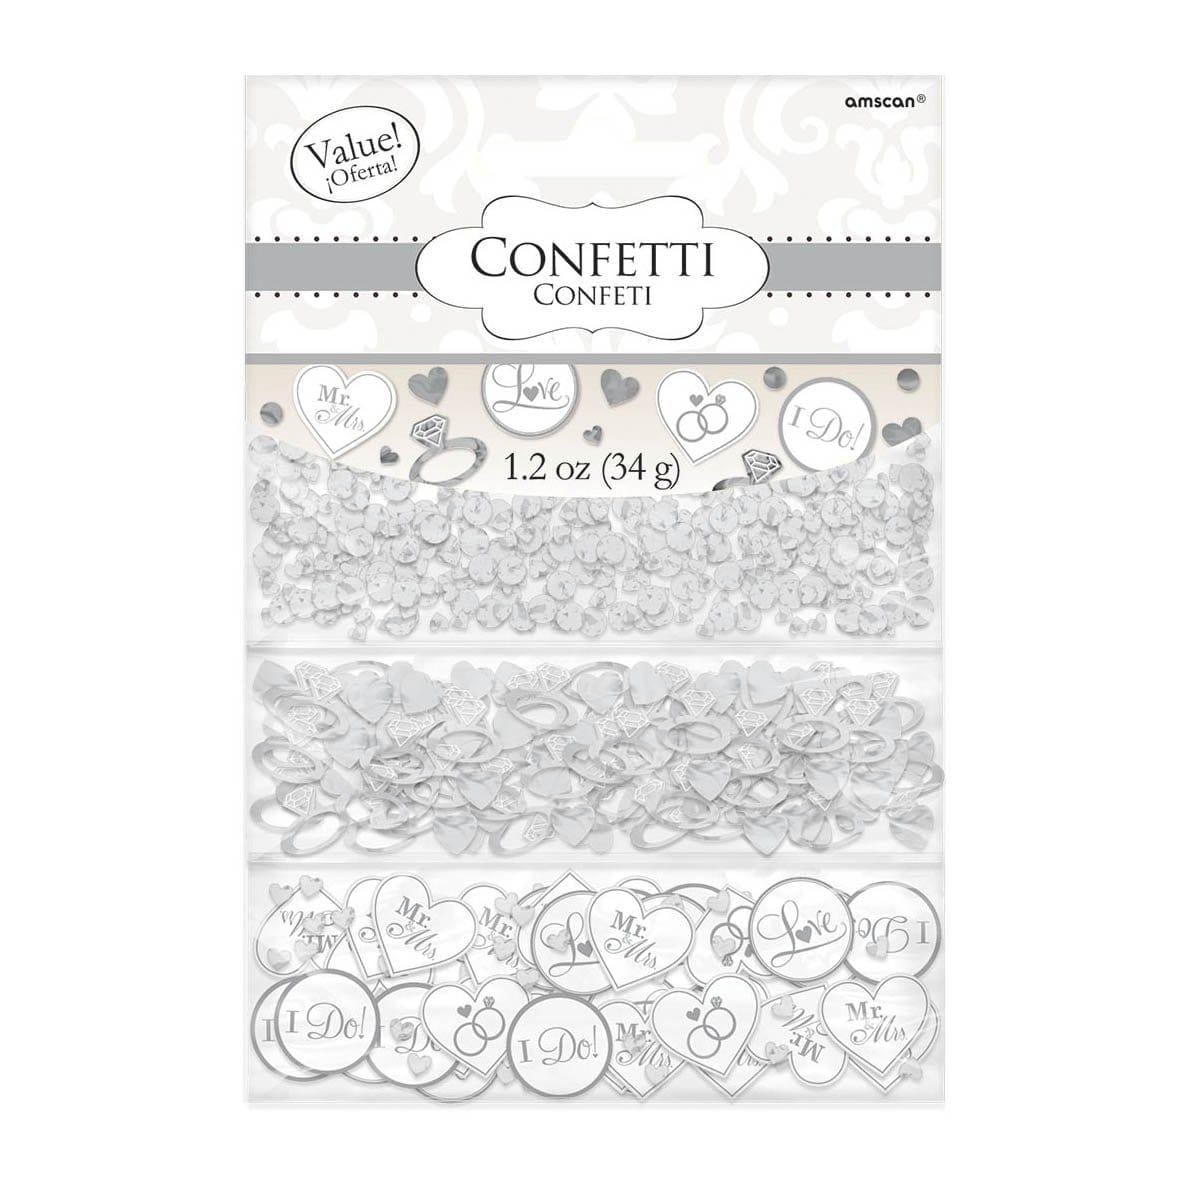 Buy Wedding I Do Confetti - White sold at Party Expert